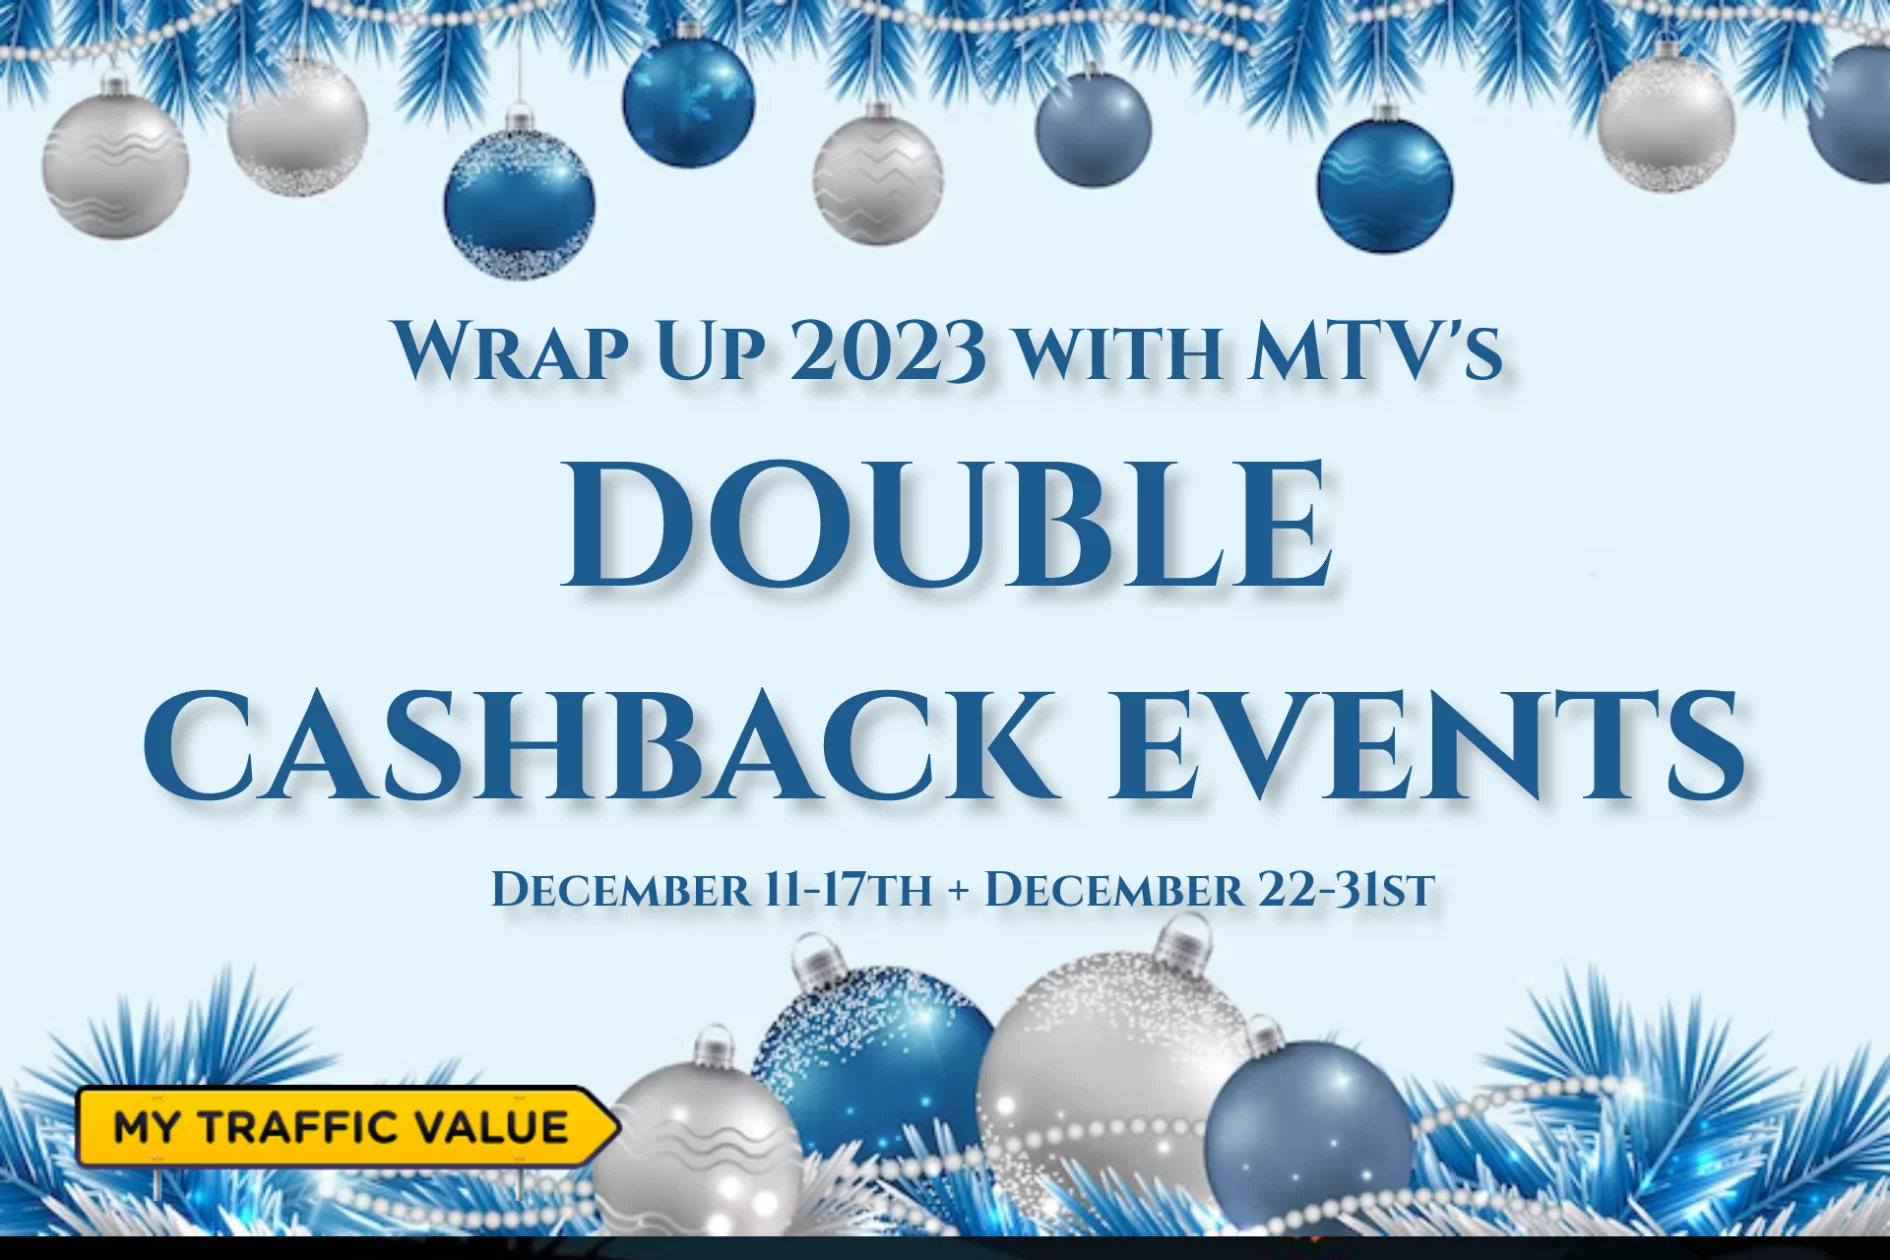 wrap up 2023 with MTV's double cashback events - mytrafficvalue.com